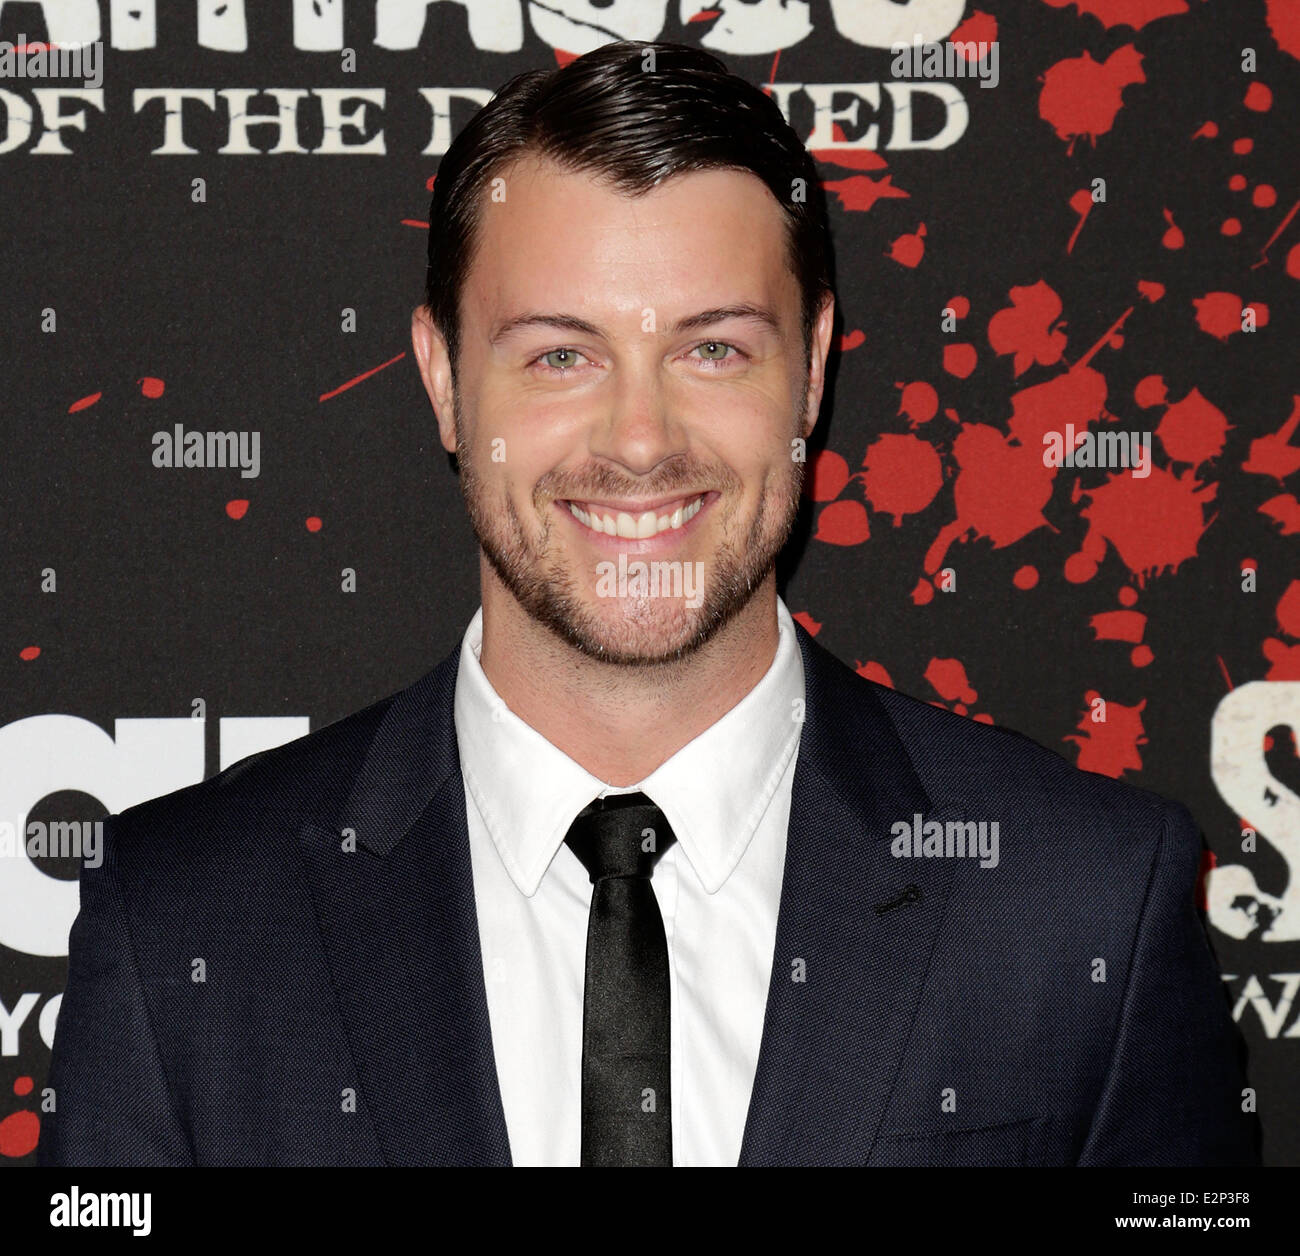 U.S. premiere screening of “Spartacus: War of the Damned” at Regal Cinemas L.A. LIVE Stadium 14  Featuring: Daniel Feuerriegel Where: Los Angeles, California, USA When: 22 Jan 2013 Stock Photo